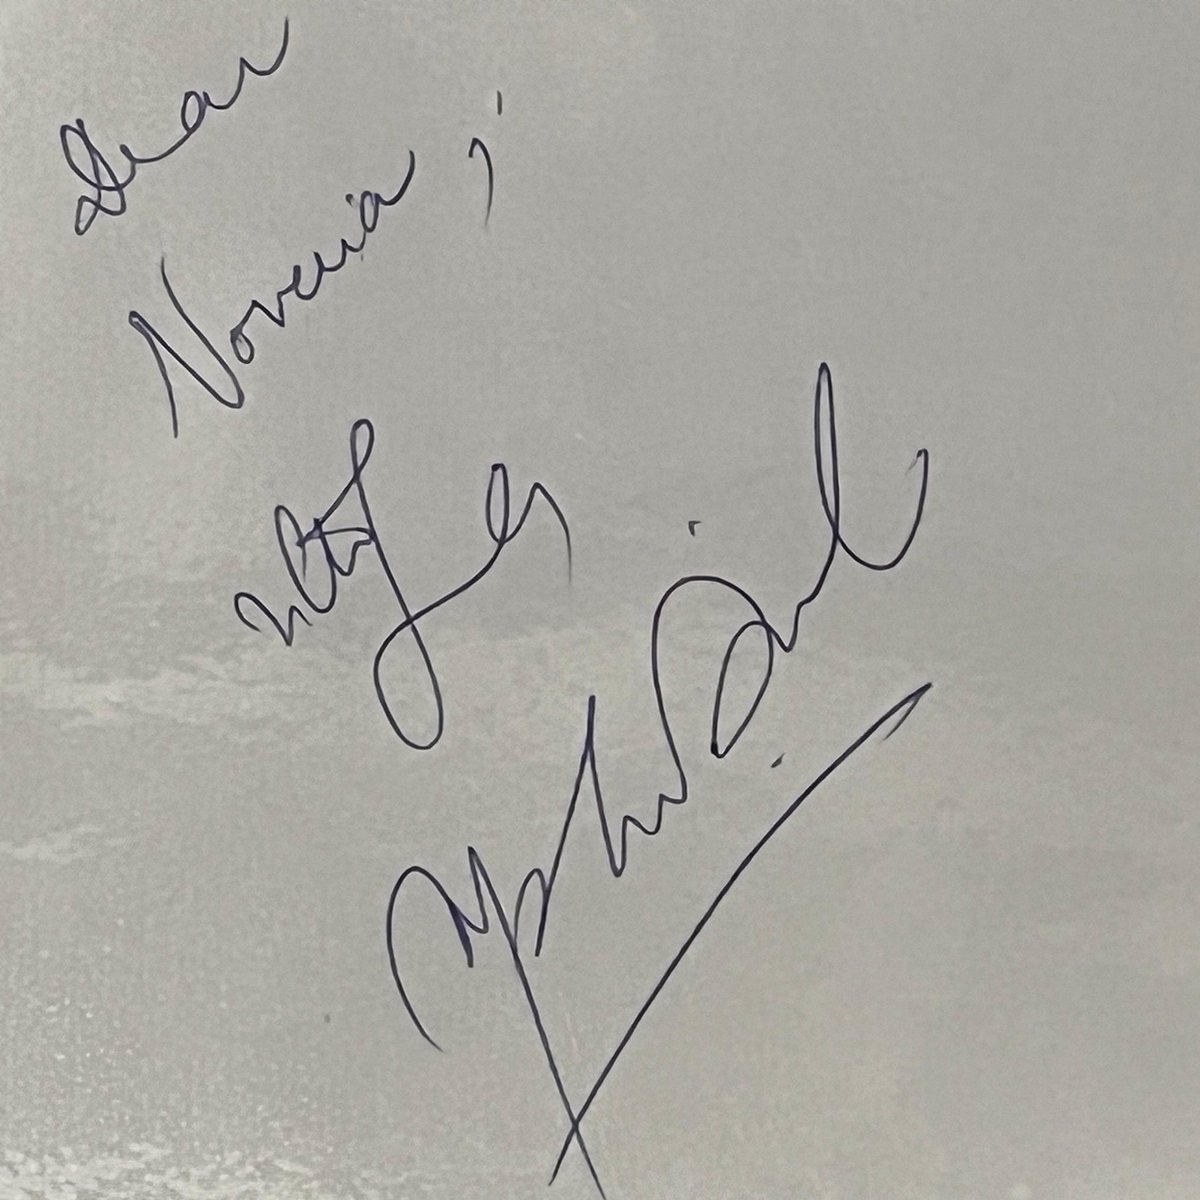 Had a confusion along the day and a restless sleep at night because out of the blue, @MadhuriEmpress surprised me with an unexpected gift. Thanks a lot, guys! 😭😂🫶🏼 The rest is our story which is a 'secret'. 🤭 And thank you so much, @MadhuriDixit Ma'am! 🥹👑✨️❤️ LY, all! ❤️